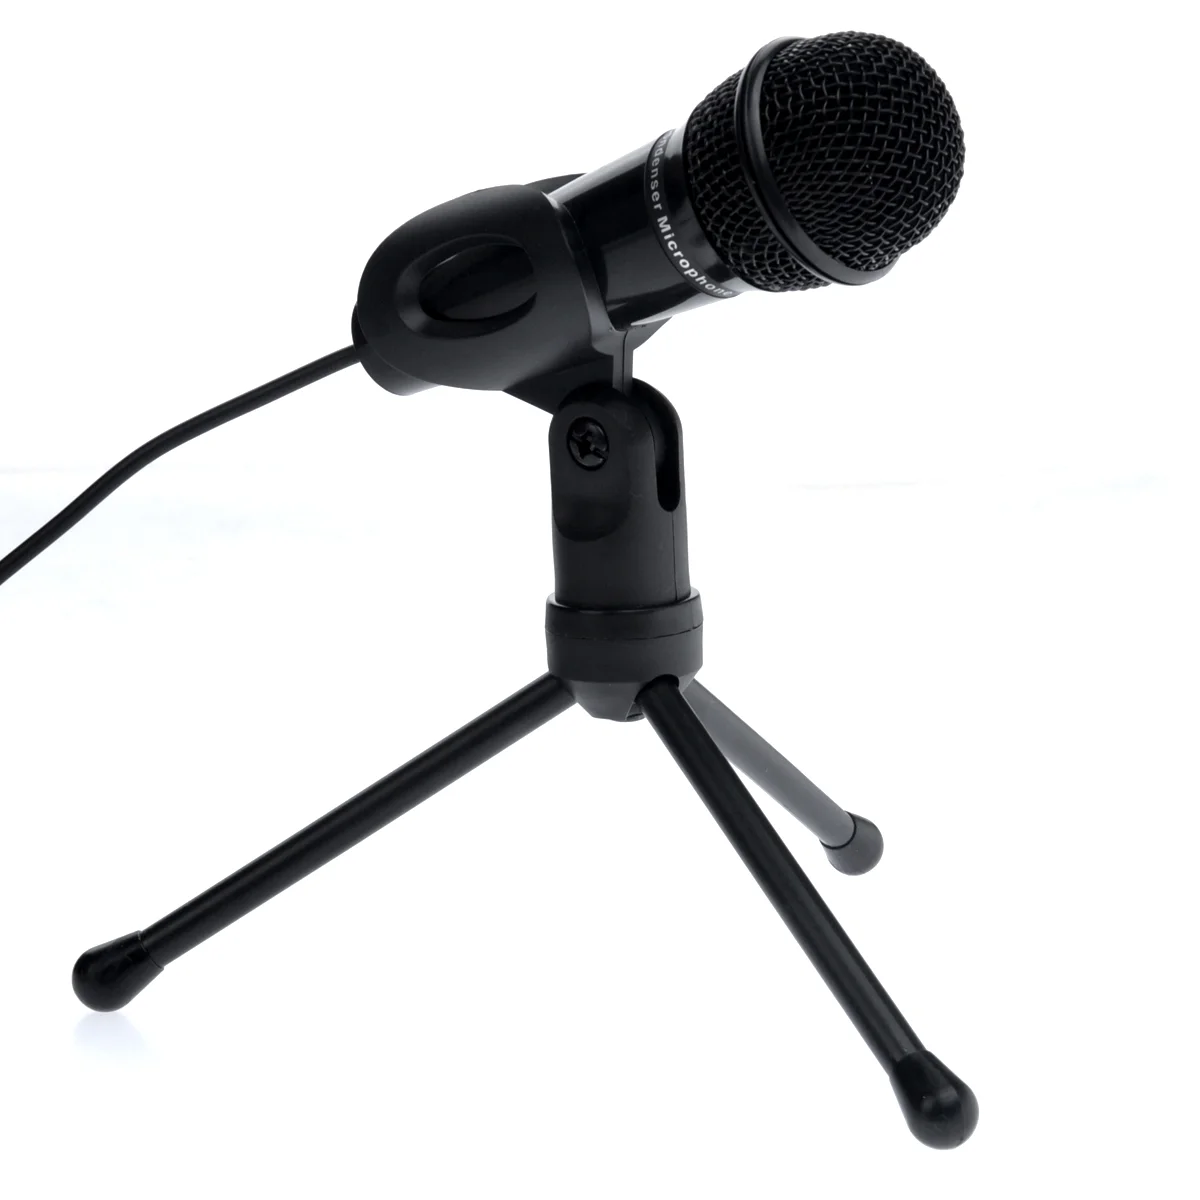 

SF-910 Portable 3.5mm Stereo Condenser Recording Microphone Mic with Mini Tripod Stand for Chatting over MSN, SKYPE, Singing